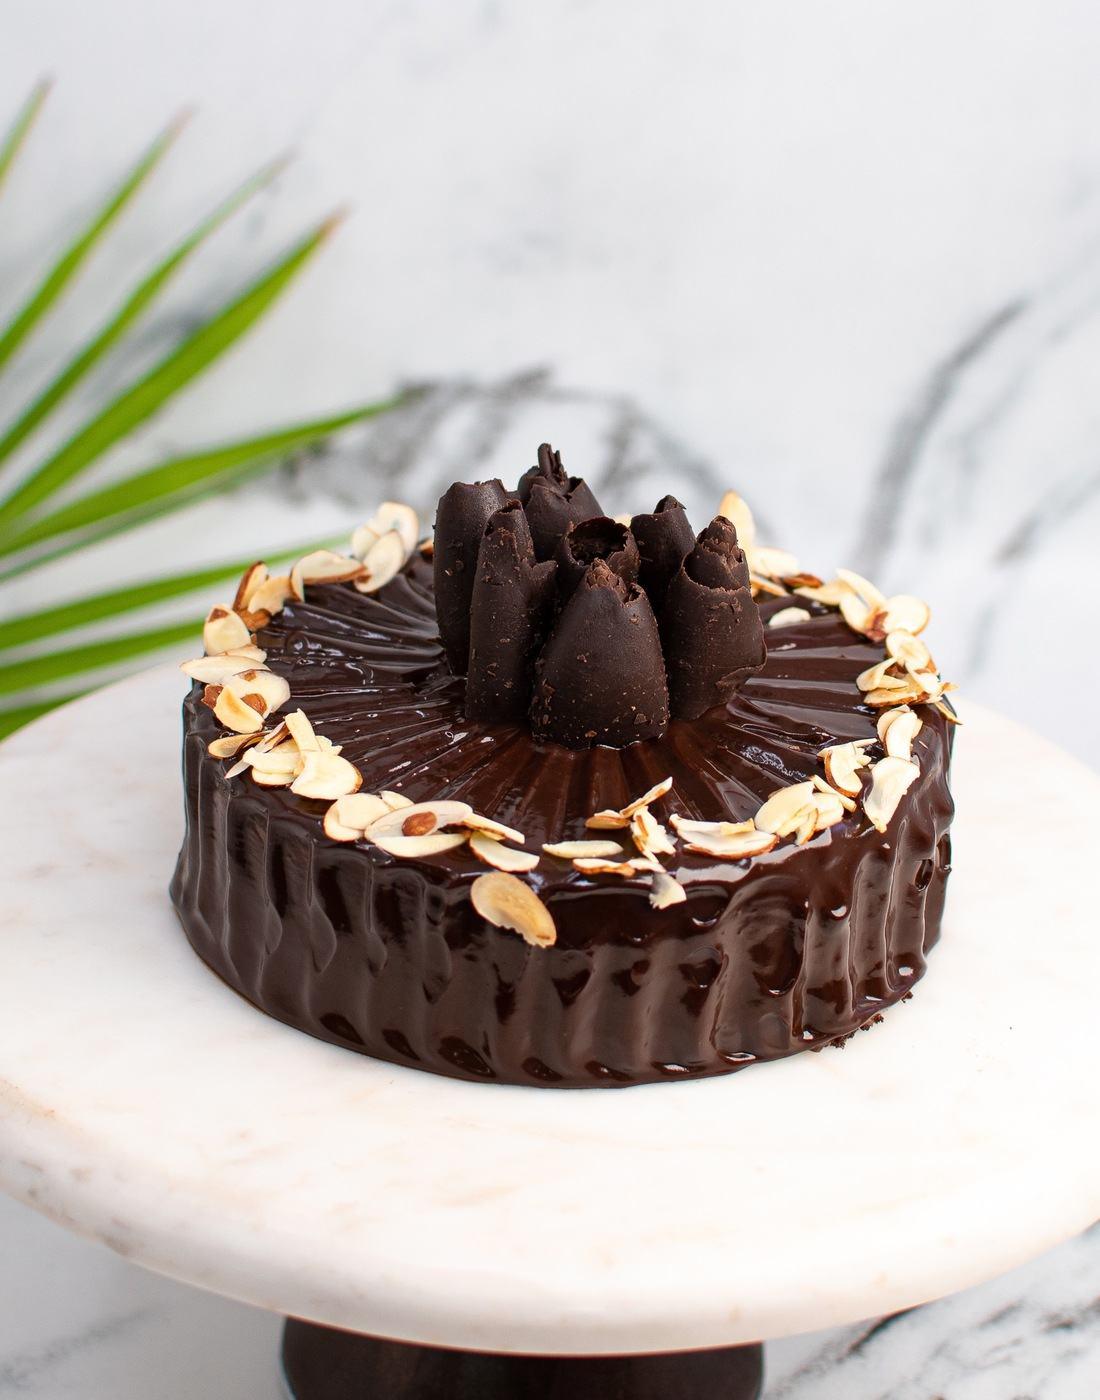 Classic Belgian Chocolate Cake | Free Delivery in 2 hours